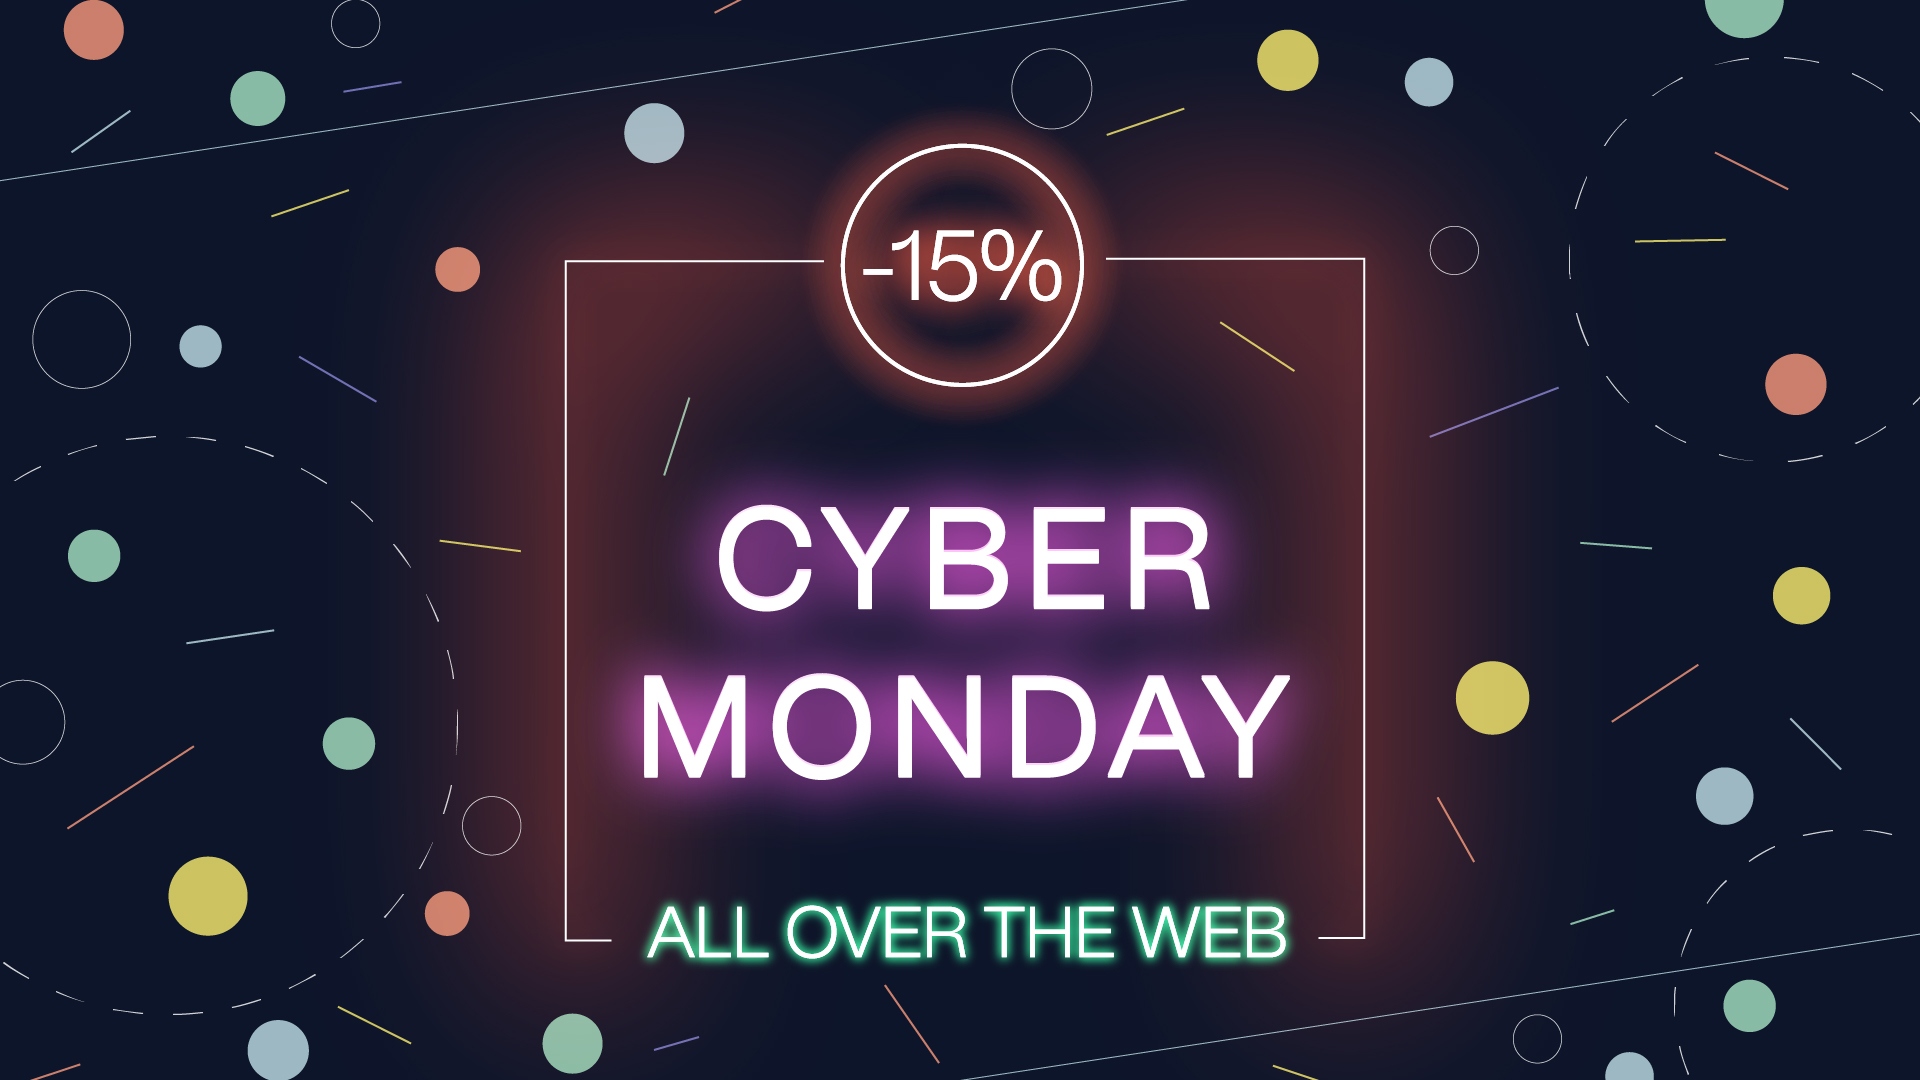 Cyber Monday : -15% all over the web